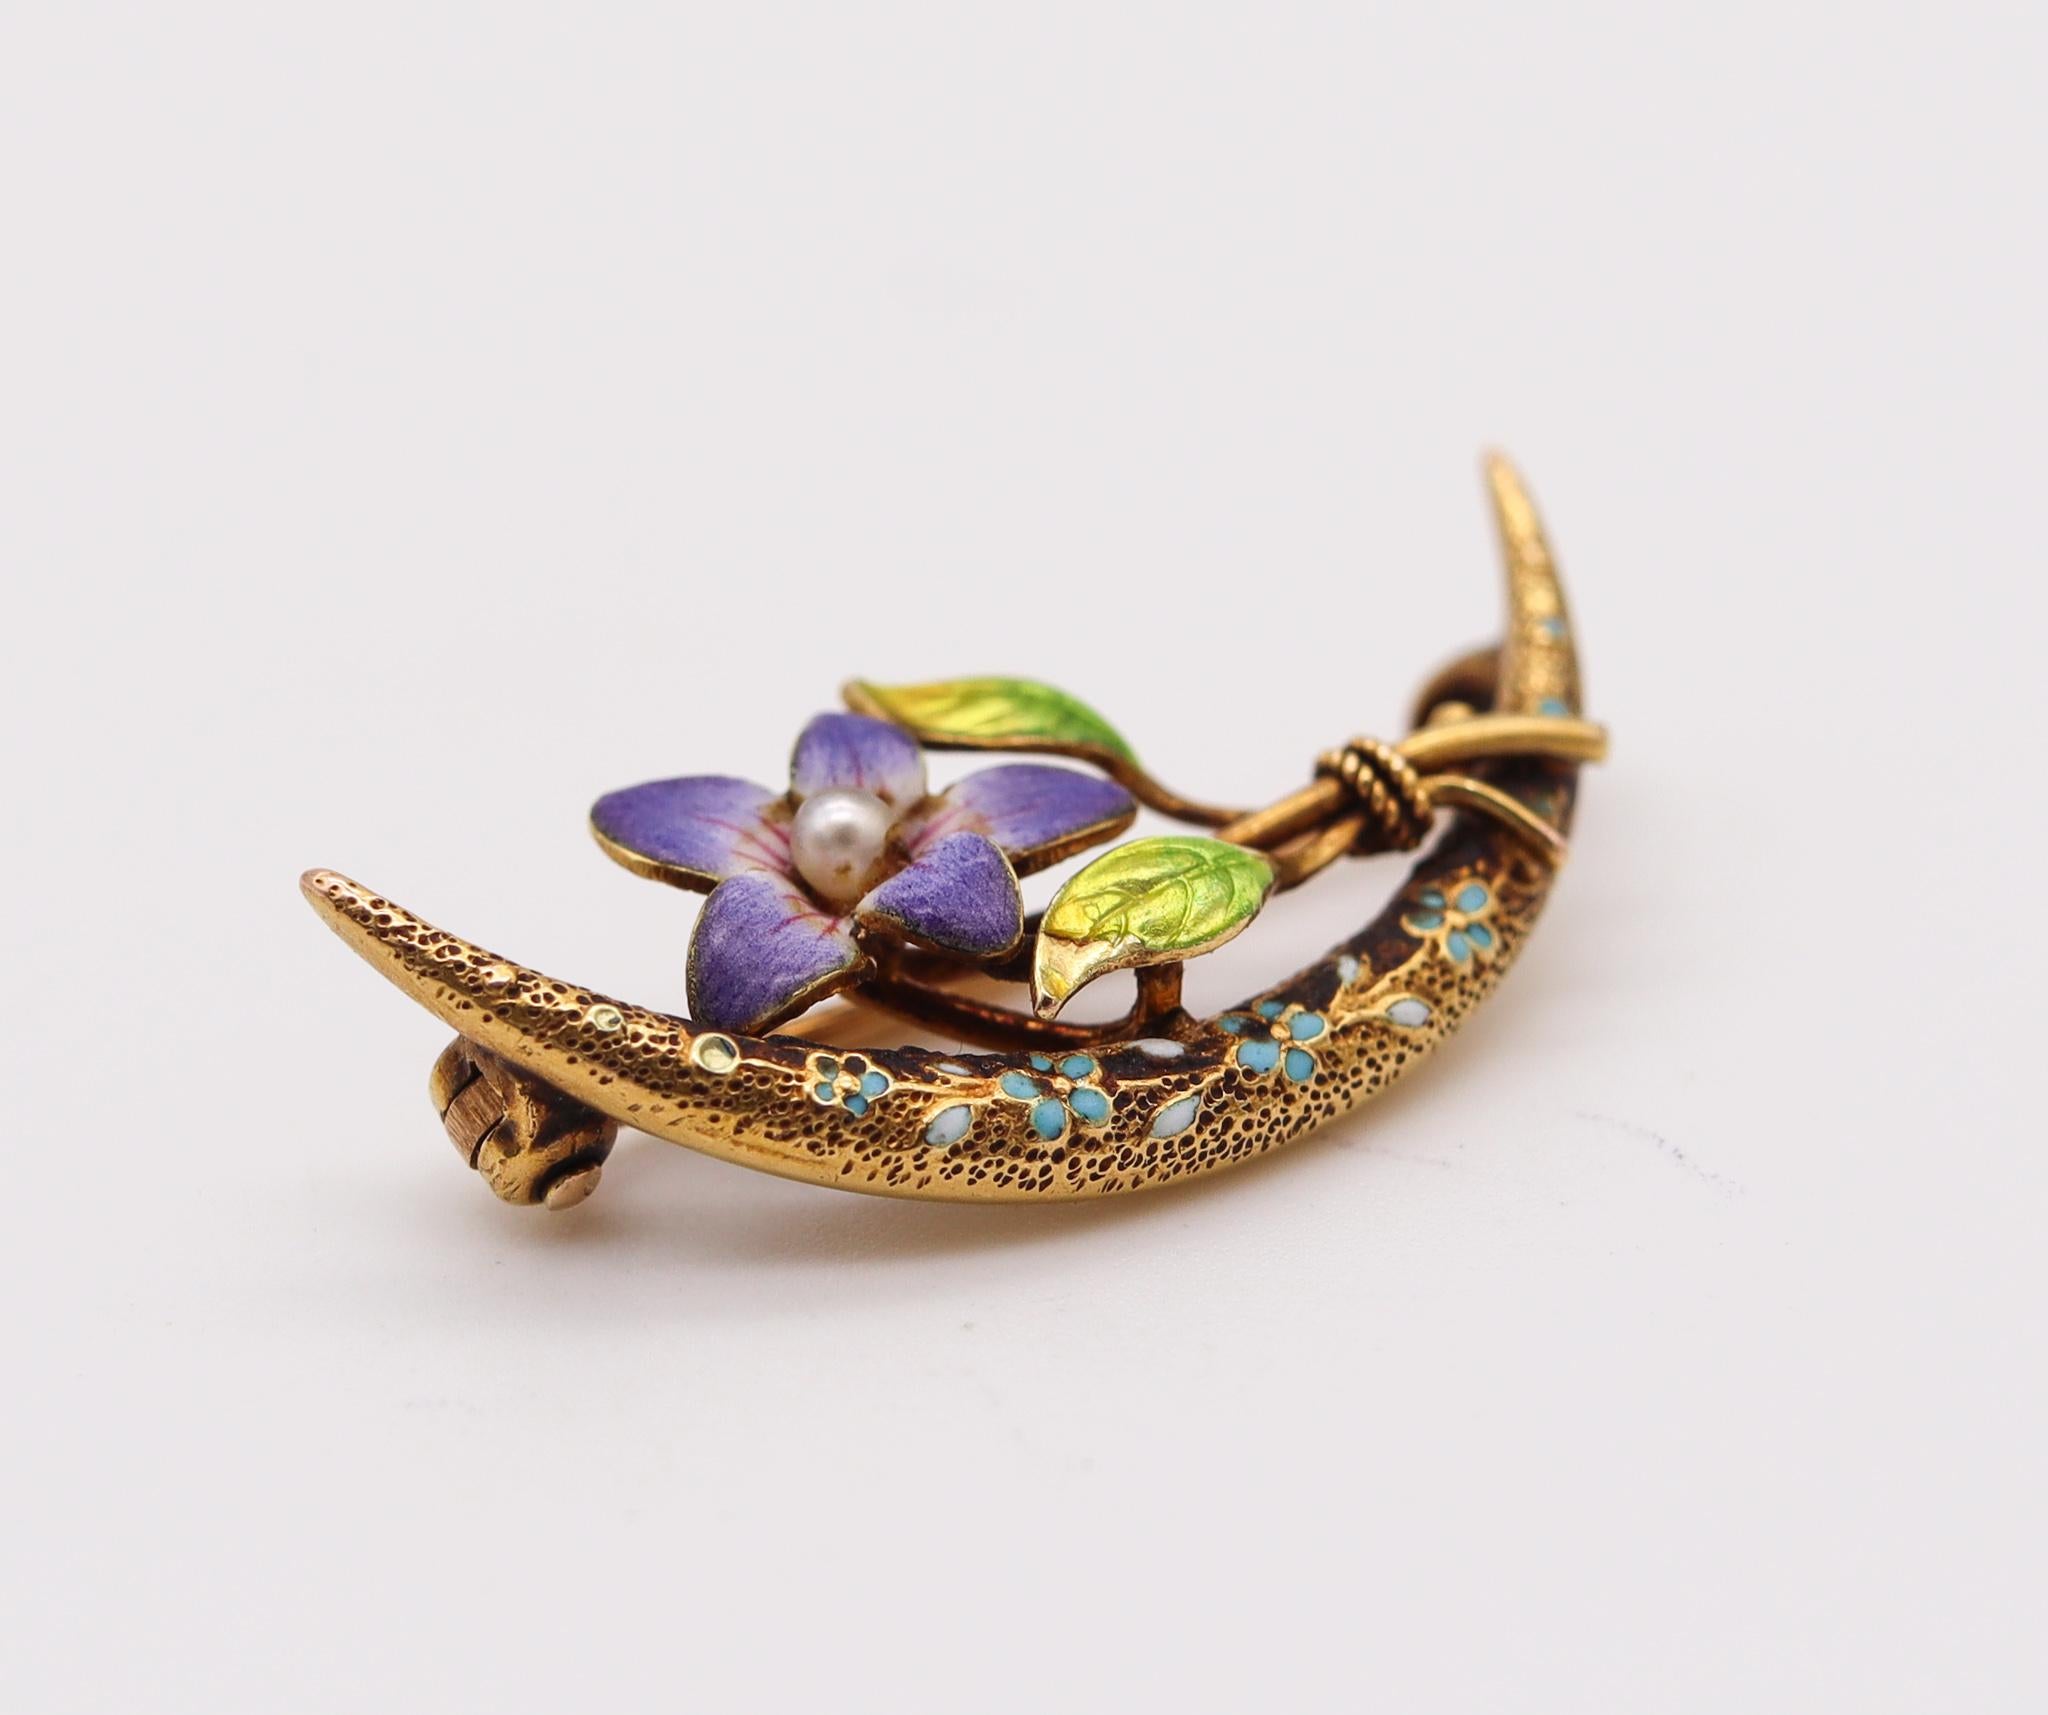 Edwardian Enameled flower pin created by Krementz & Co.

Beautiful piece, created in America during the Edwardian and the Art Nouveau periods back in the 1900-1910. This beautiful pin brooch has been carefully crafted by the Krementz Company in